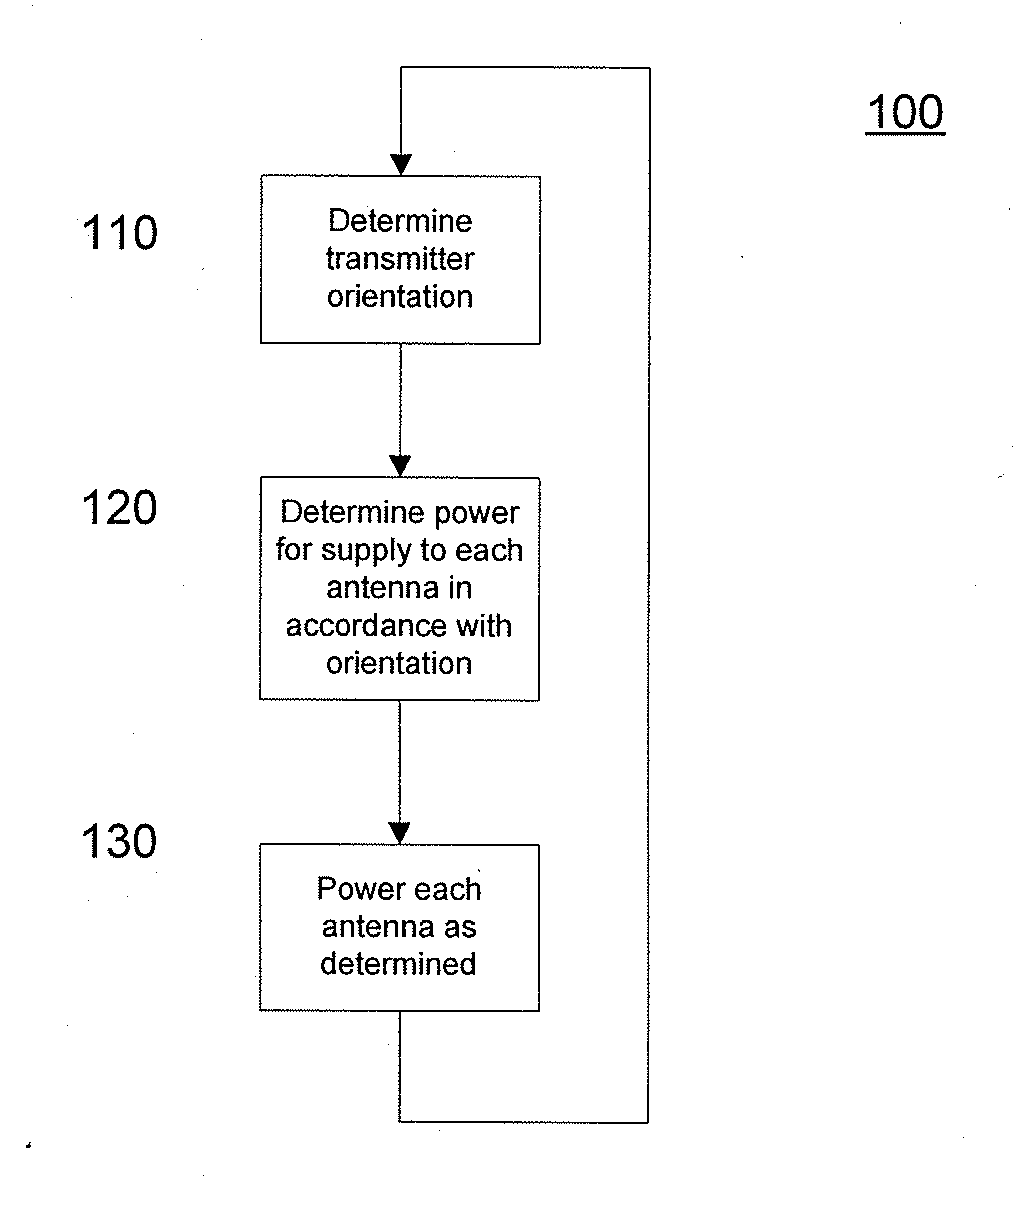 Method and apparatus for controlling radiation characteristics of transmitter of wireless device in correspondence with transmitter orientation